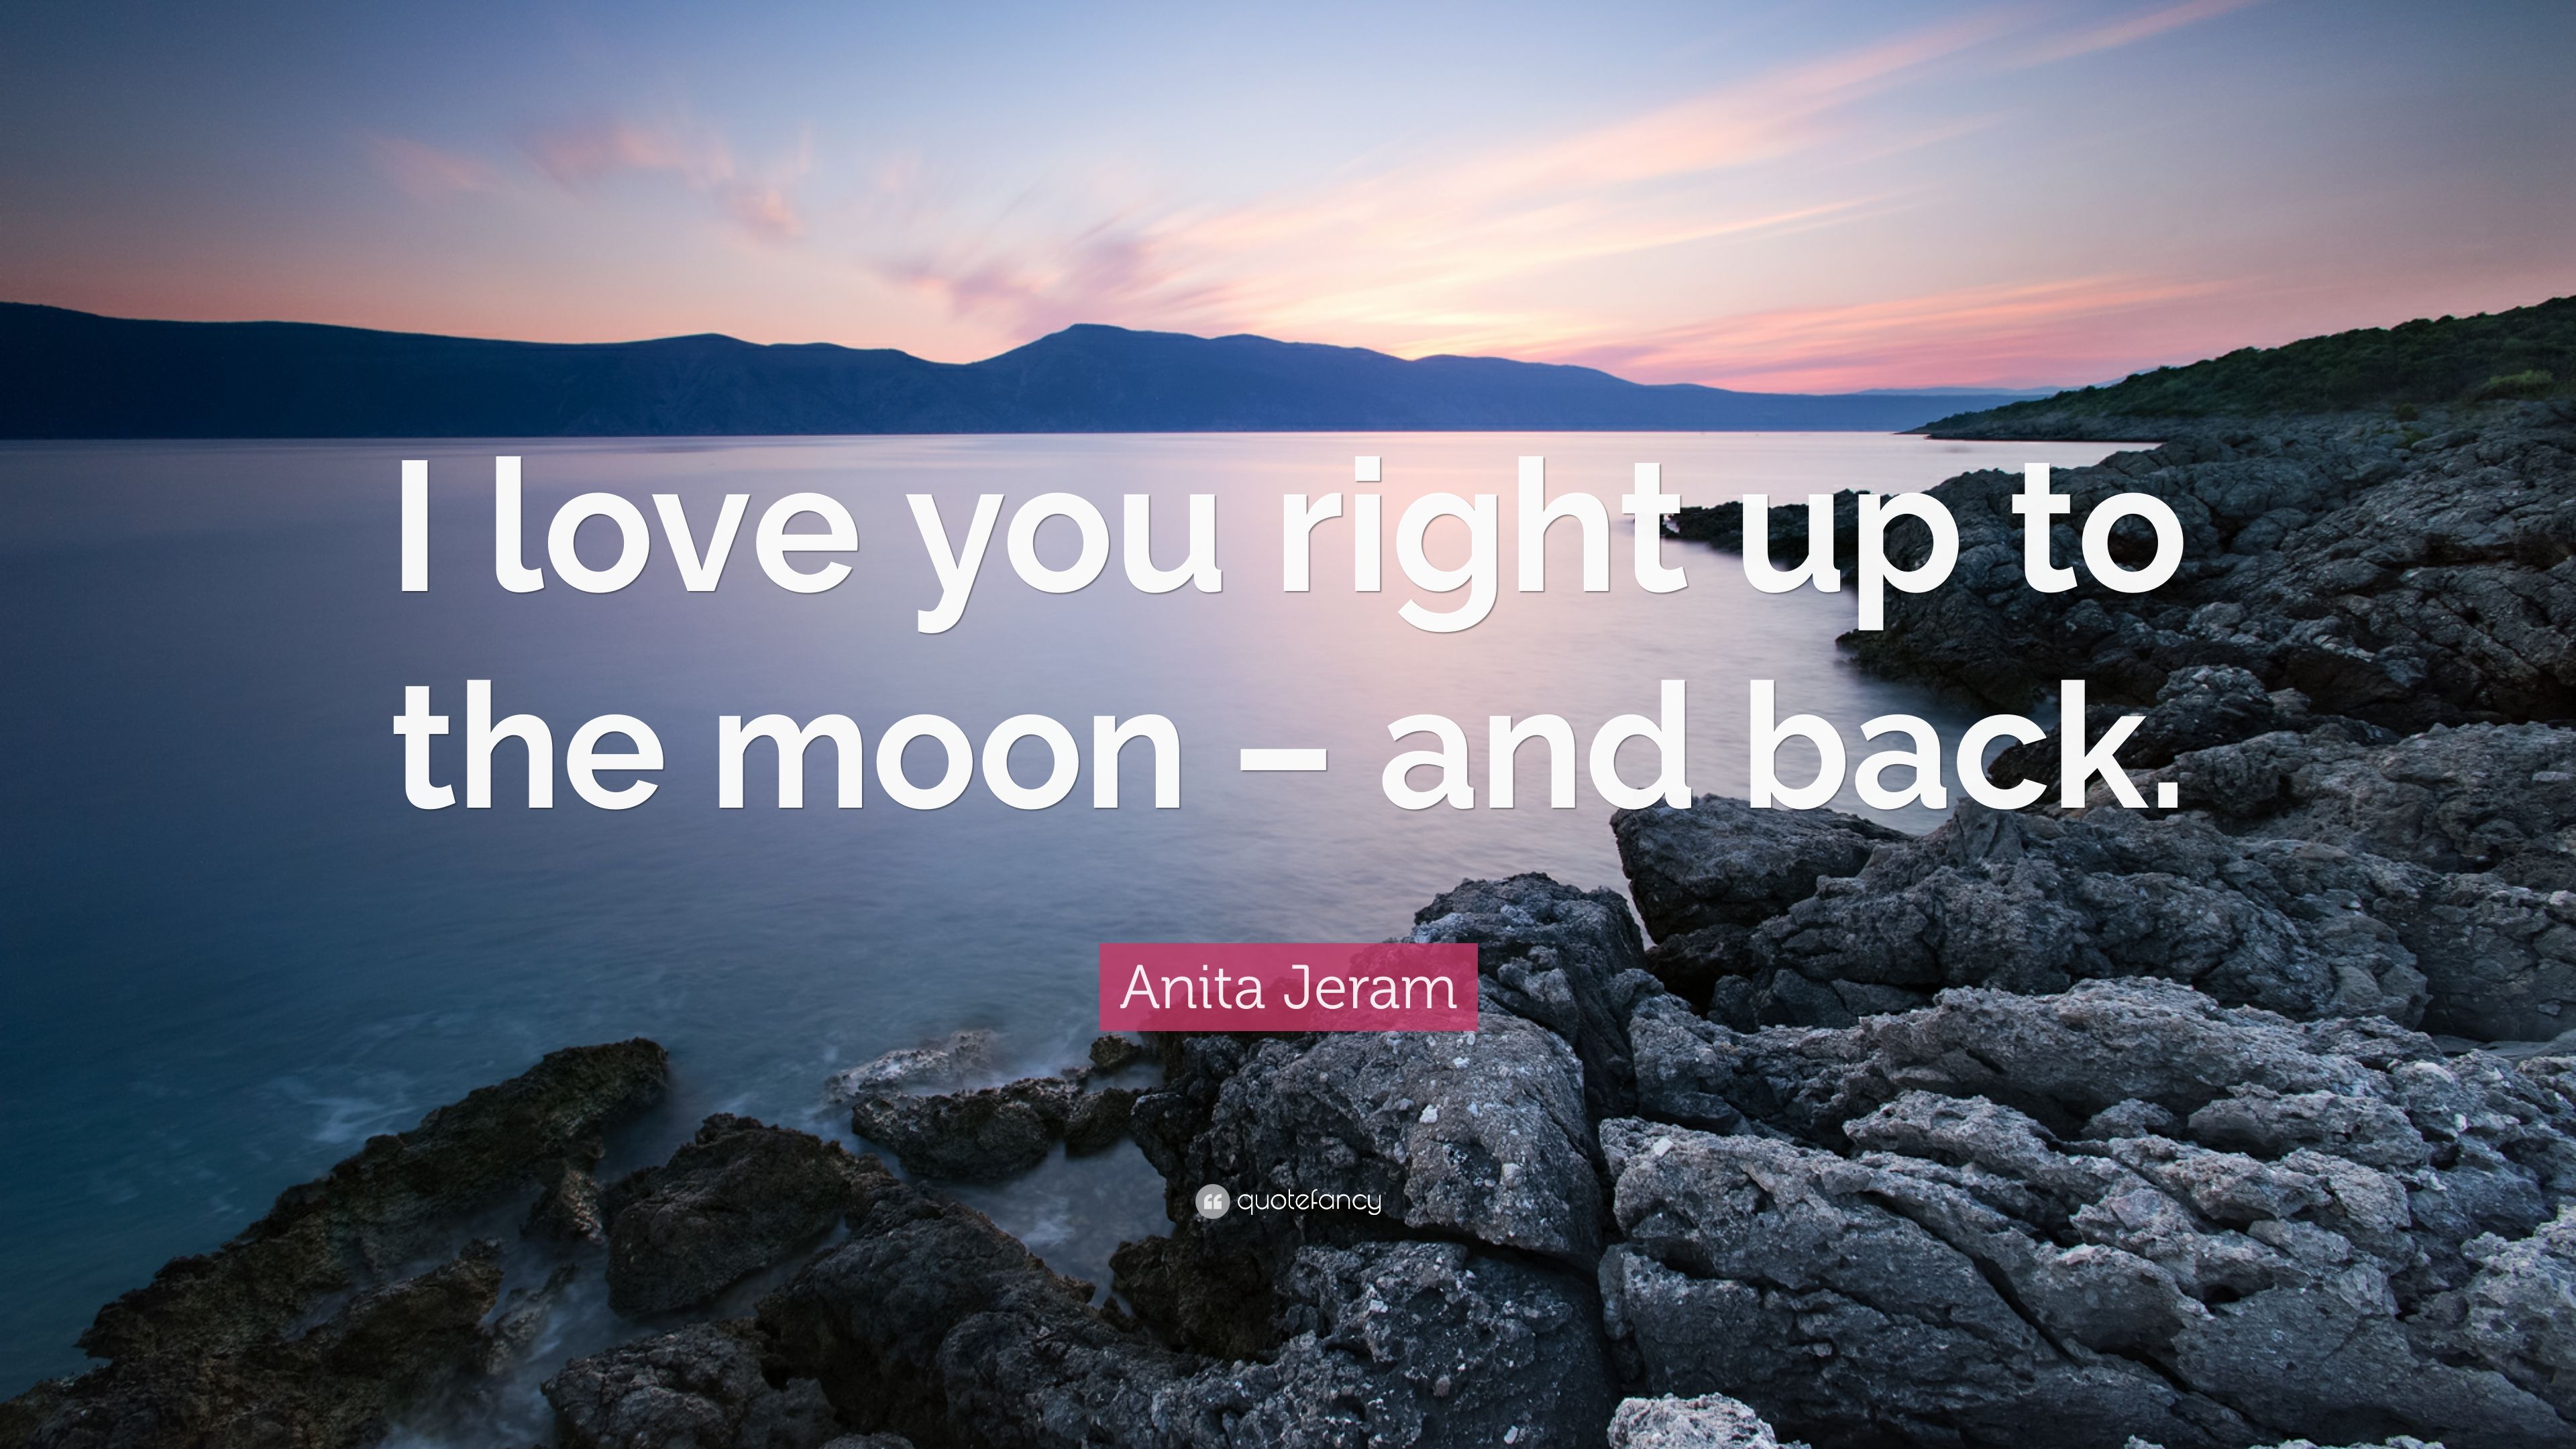 Anita Jeram Quote: “I love you right up to the moon